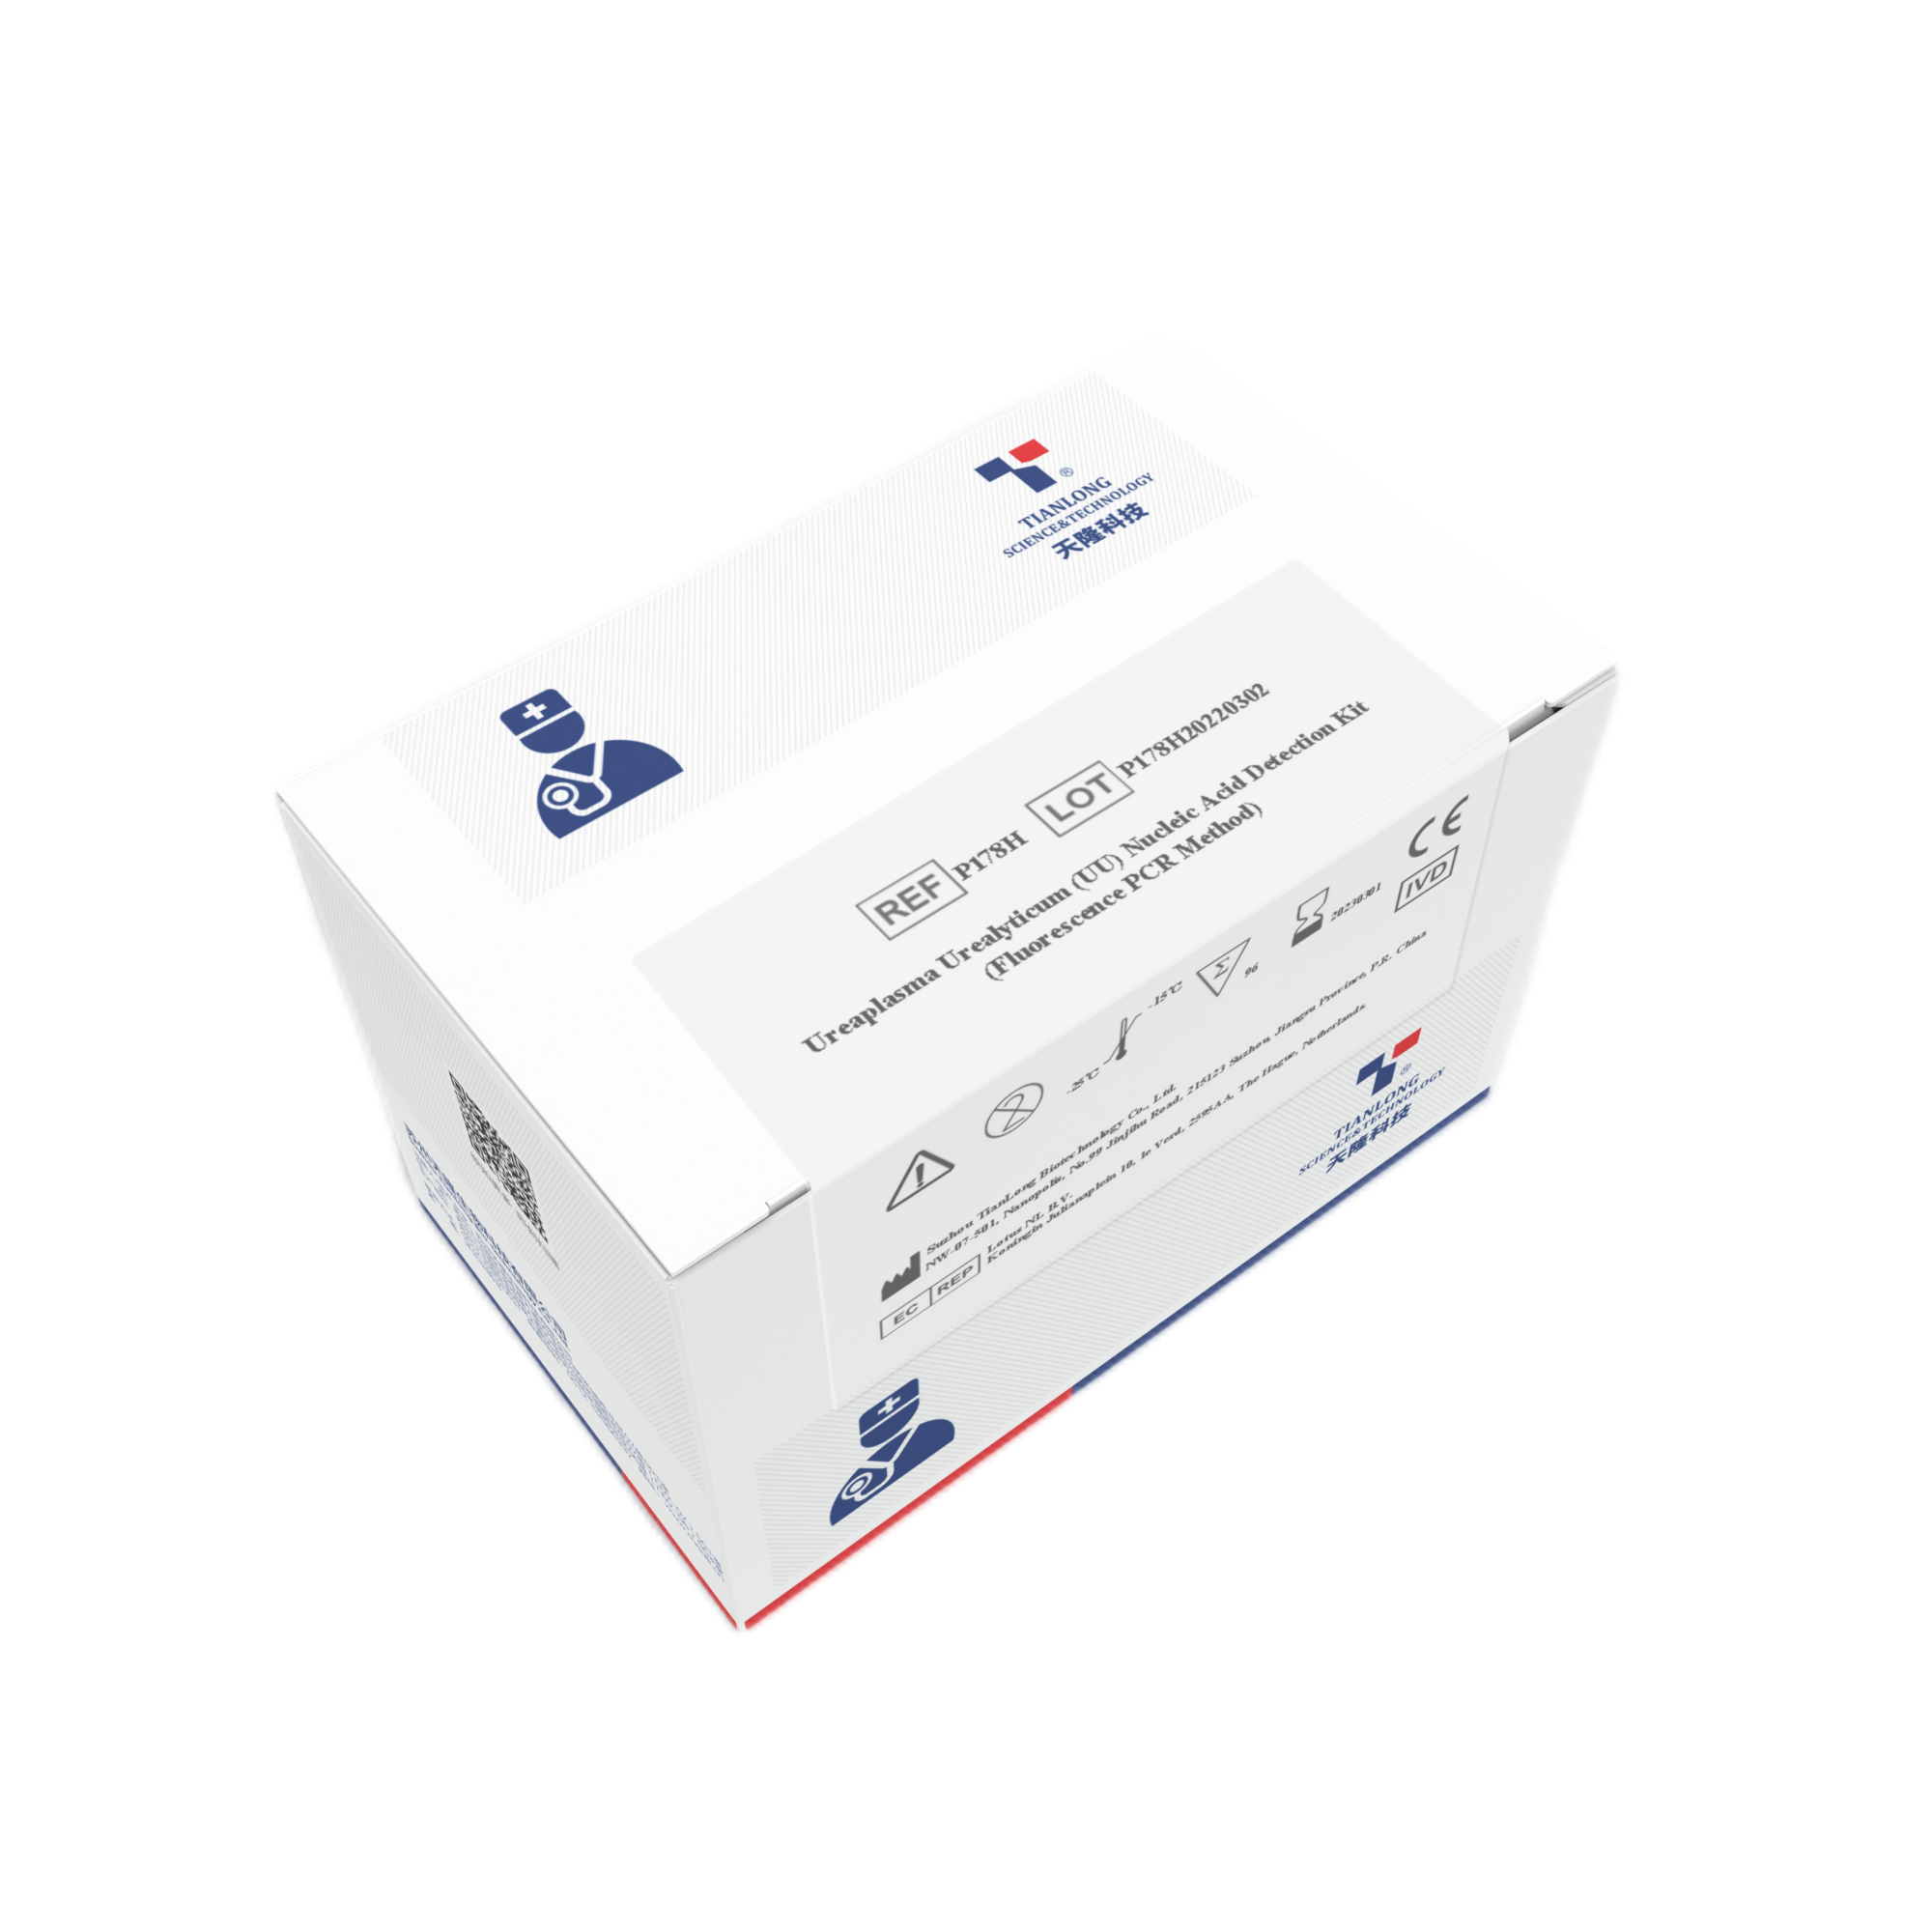 P132H- Sexually Transmitted Infections CT/ NG/UU / UP Multiplex PCR Detection Kit